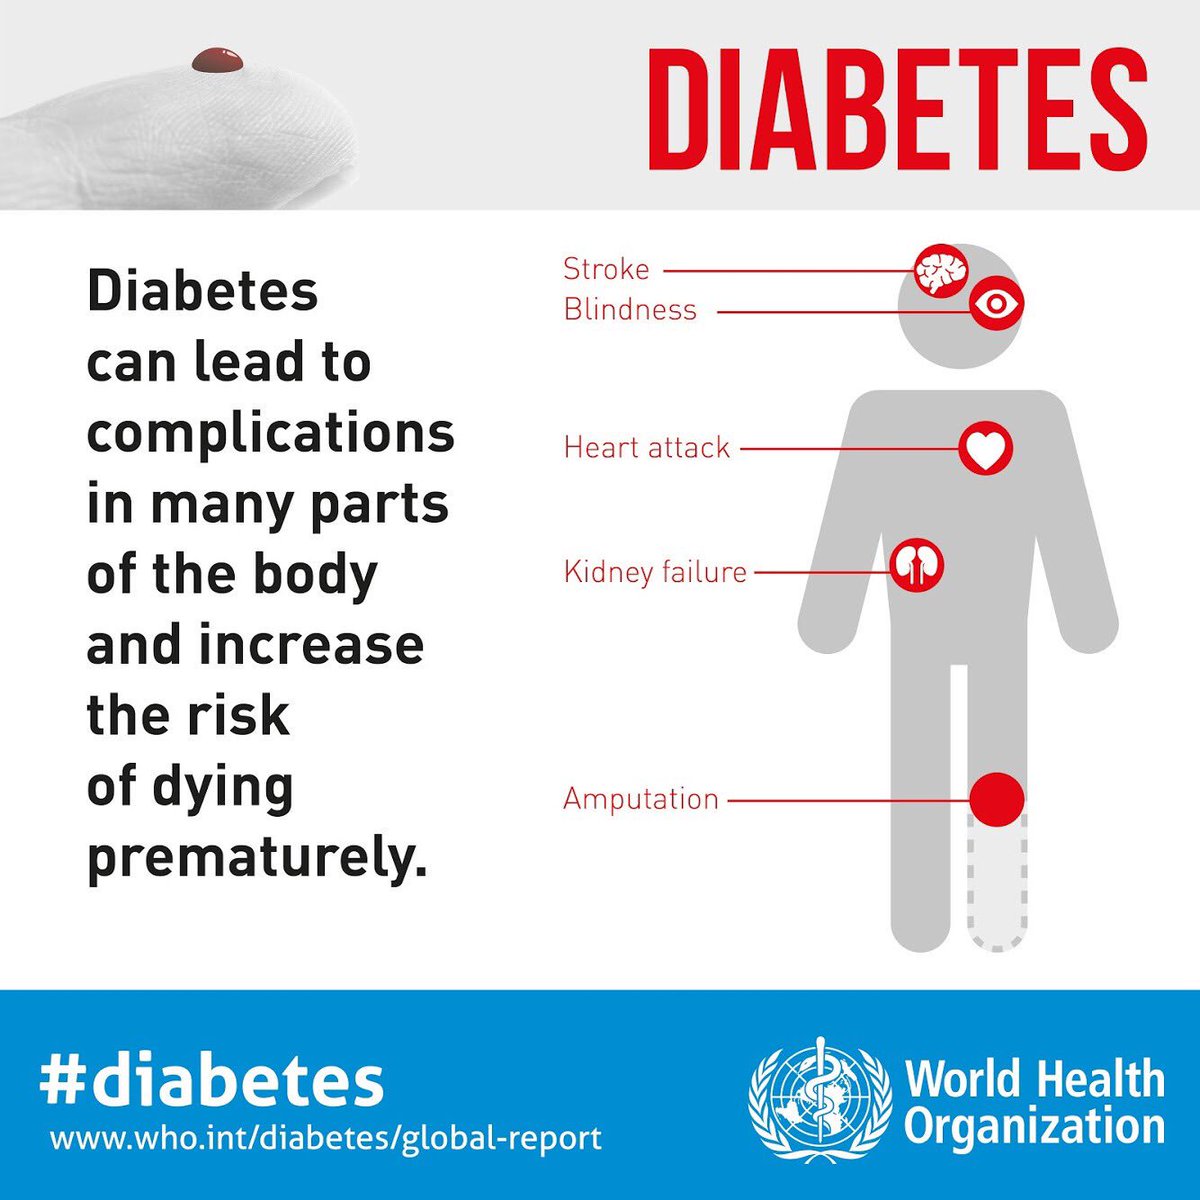 : Complications of #diabetes can lead to: